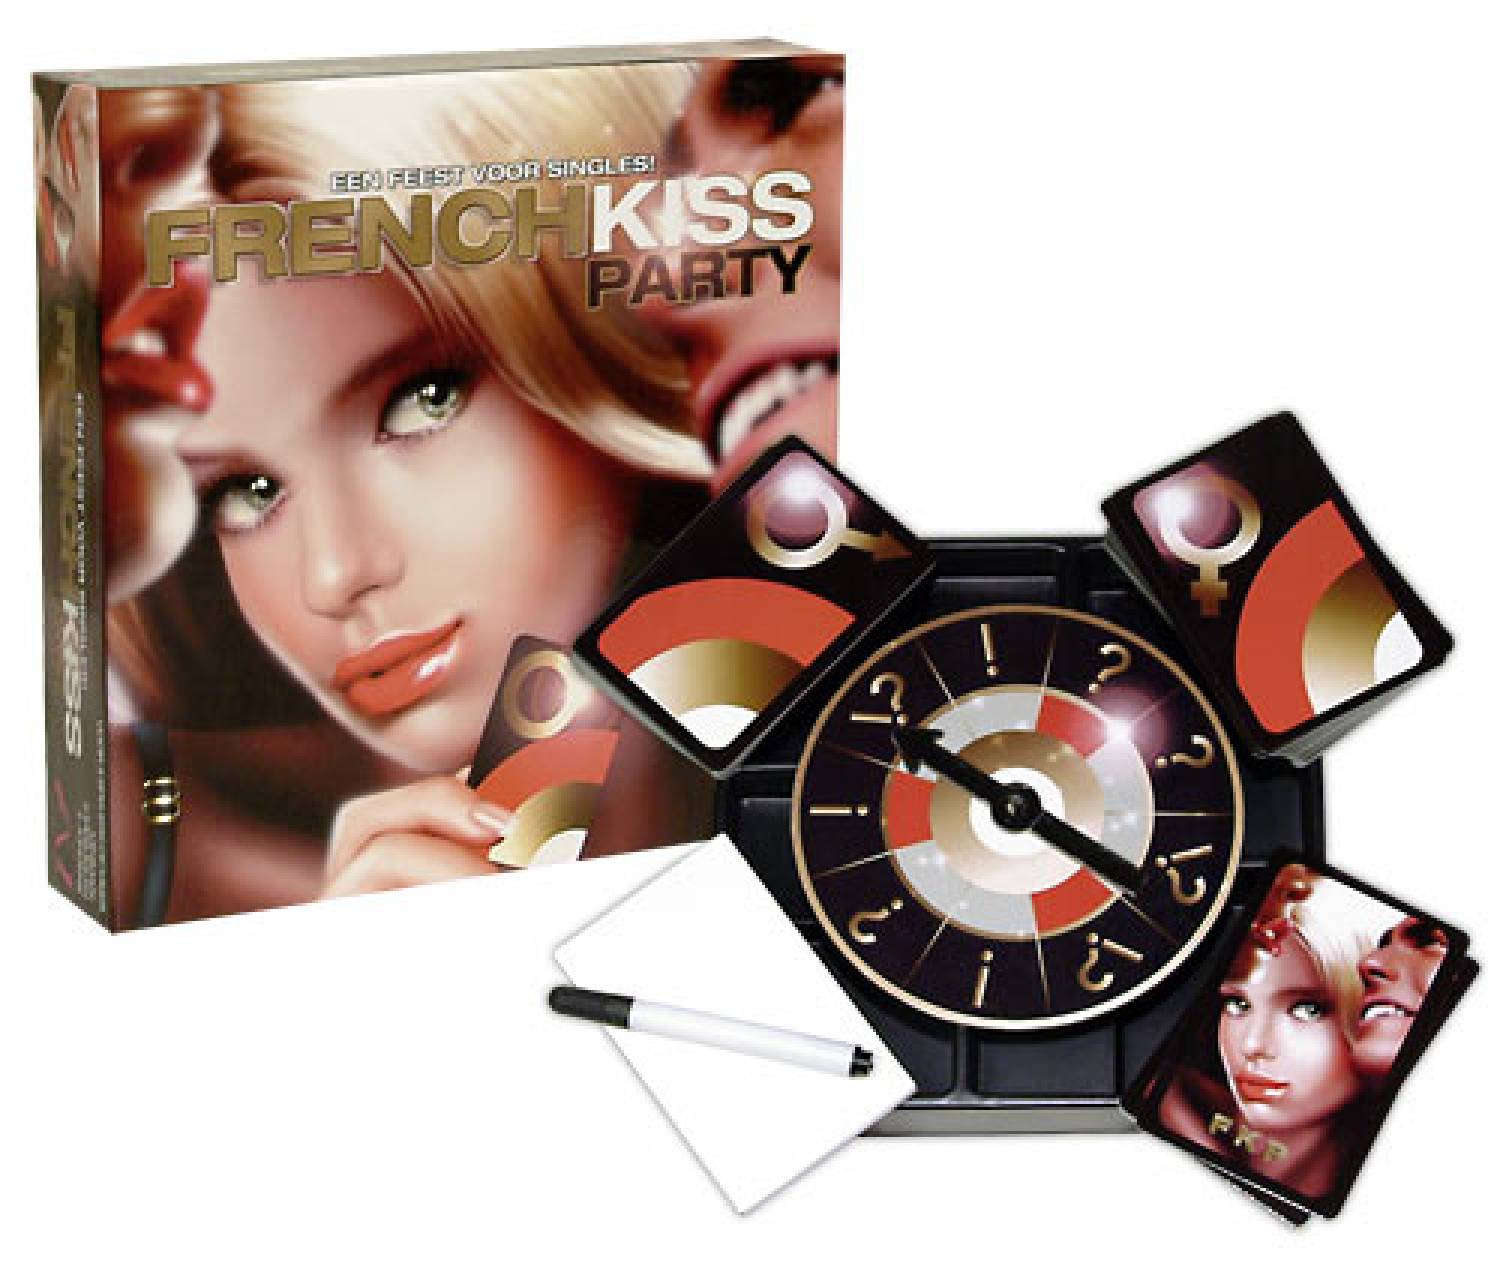 Erotic Entertainment Love Toys French Kiss Party